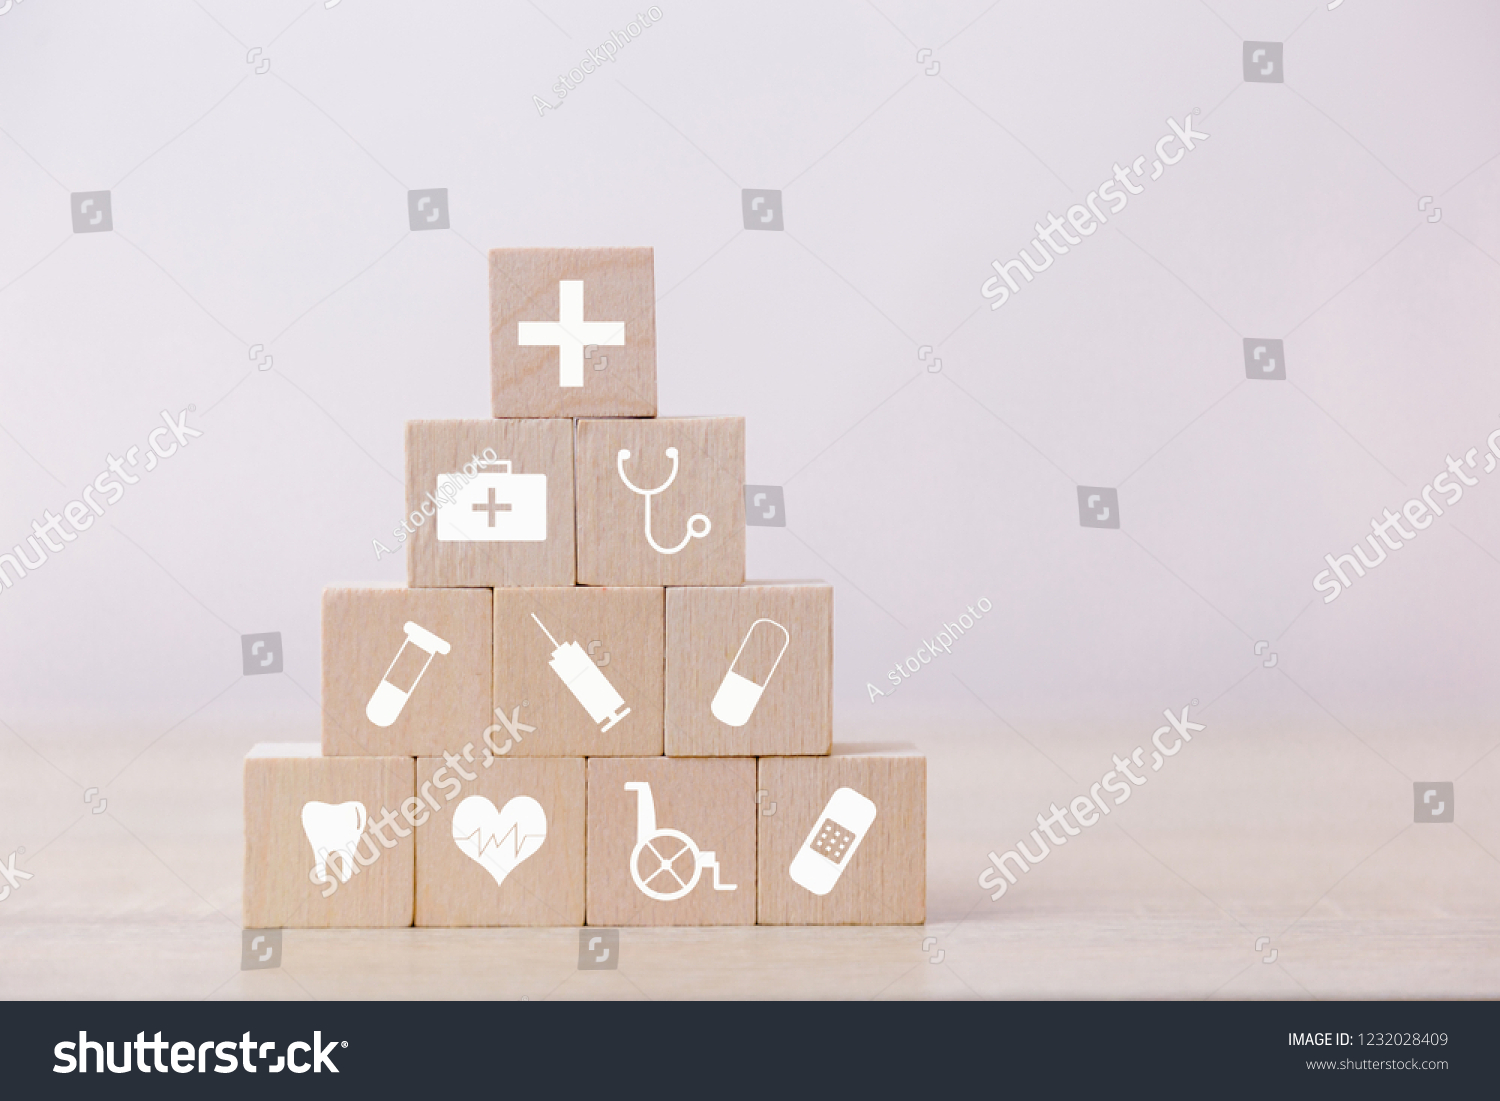 Health Insurance Concept,hand arranging wood block stacking with icon healthcare medical. #1232028409